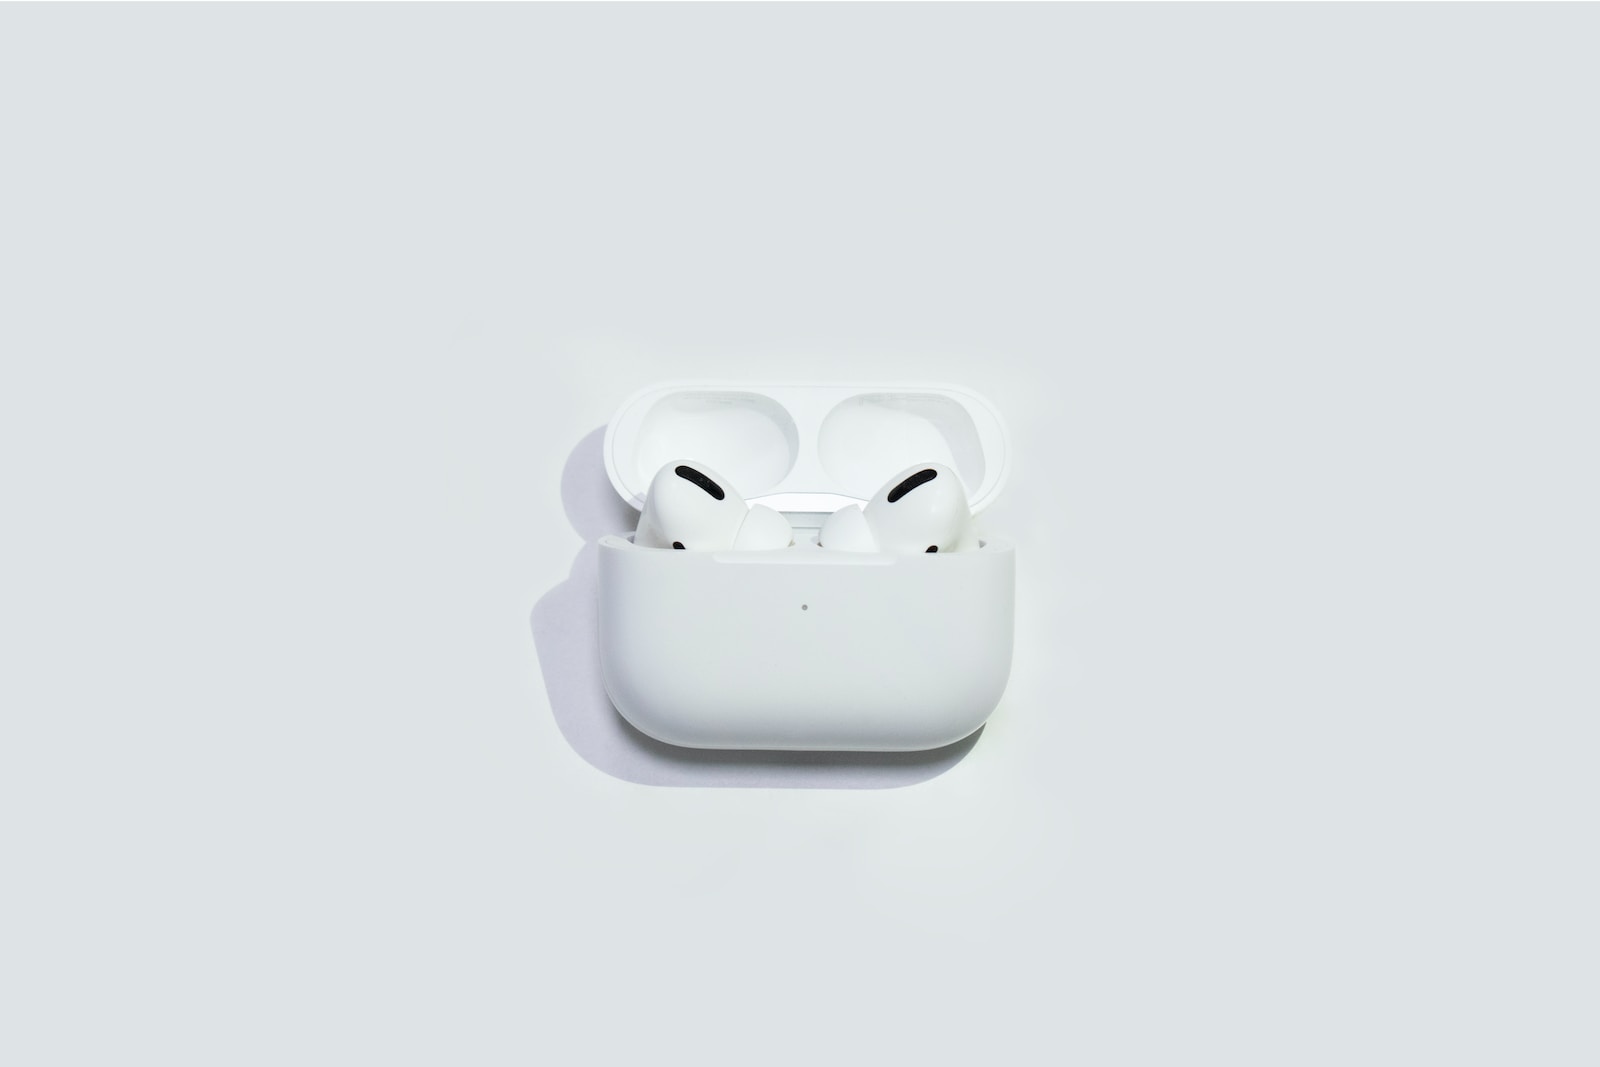 
How To Turn Off Ear Detection On AirPods: A Step-By-Step Guide